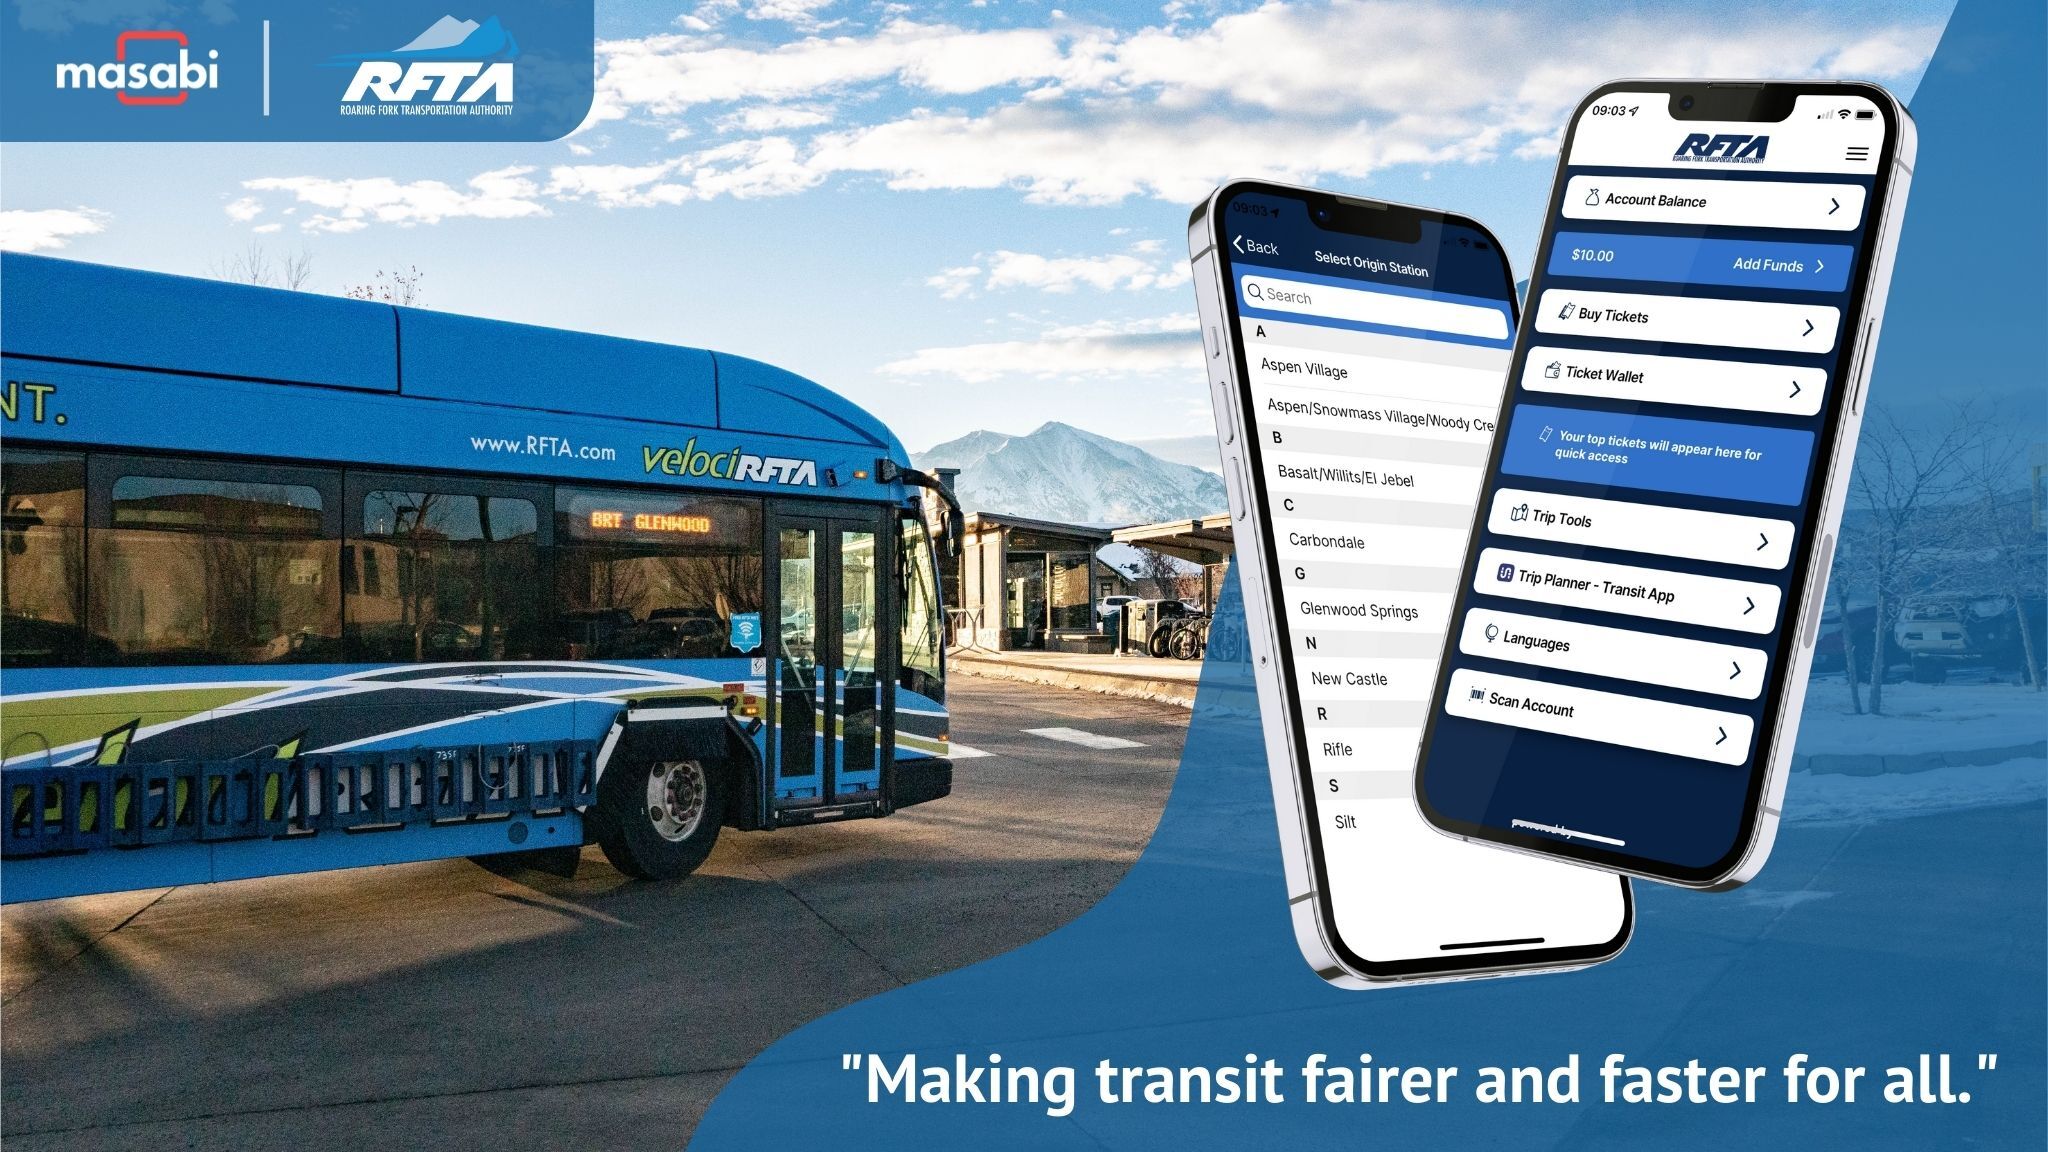 Making transit fairer and faster for all.”